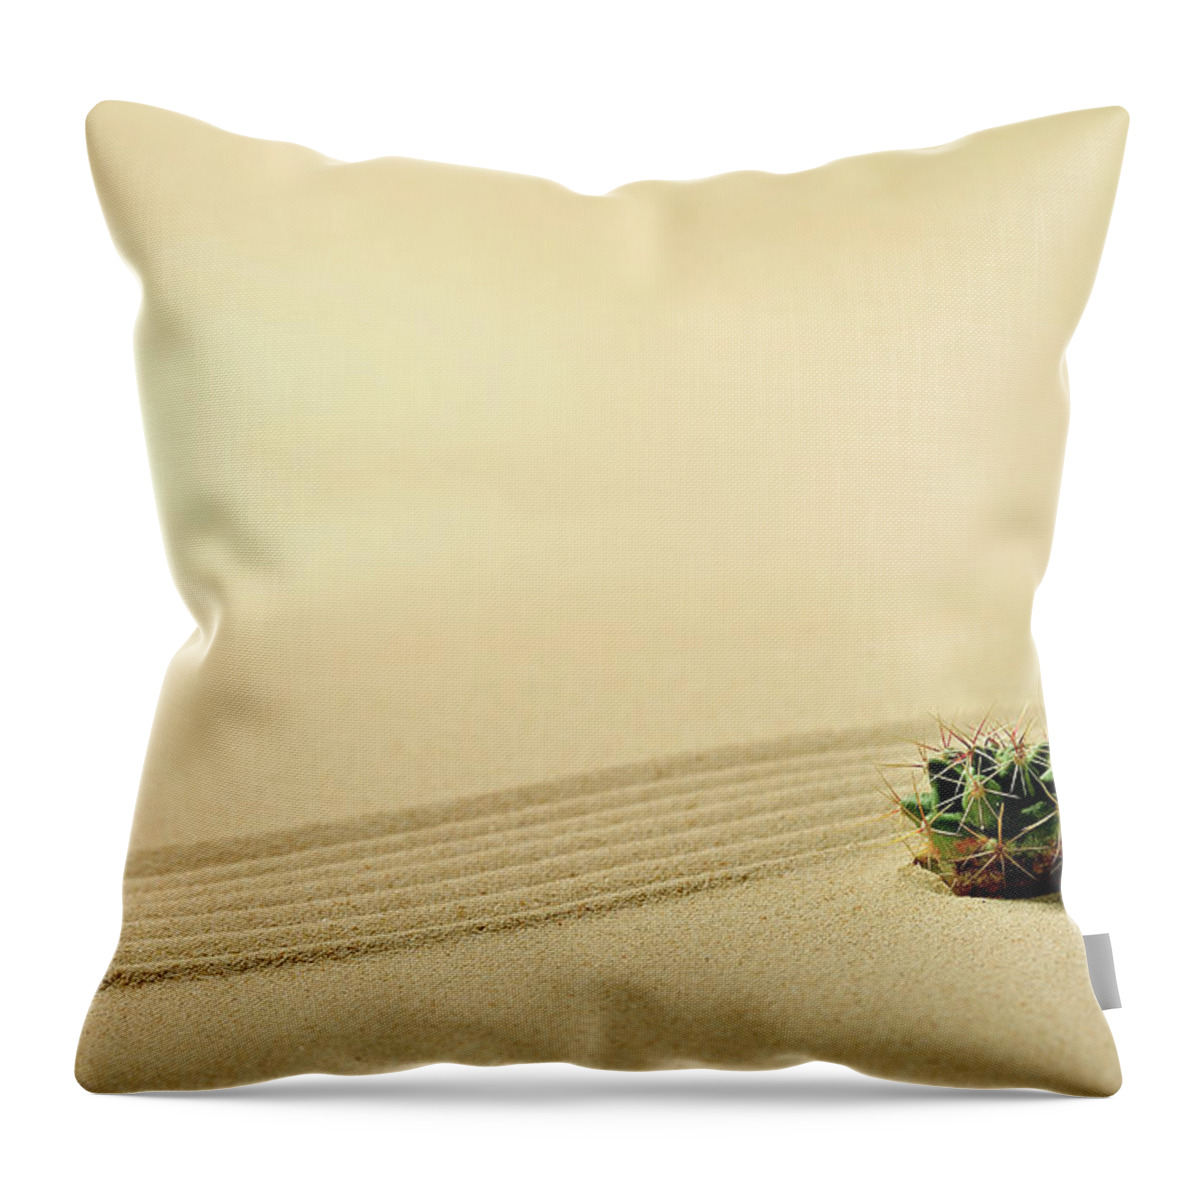 Art Throw Pillow featuring the photograph A Cactus And Wave Pattern In The Sand #2 by Yagi Studio